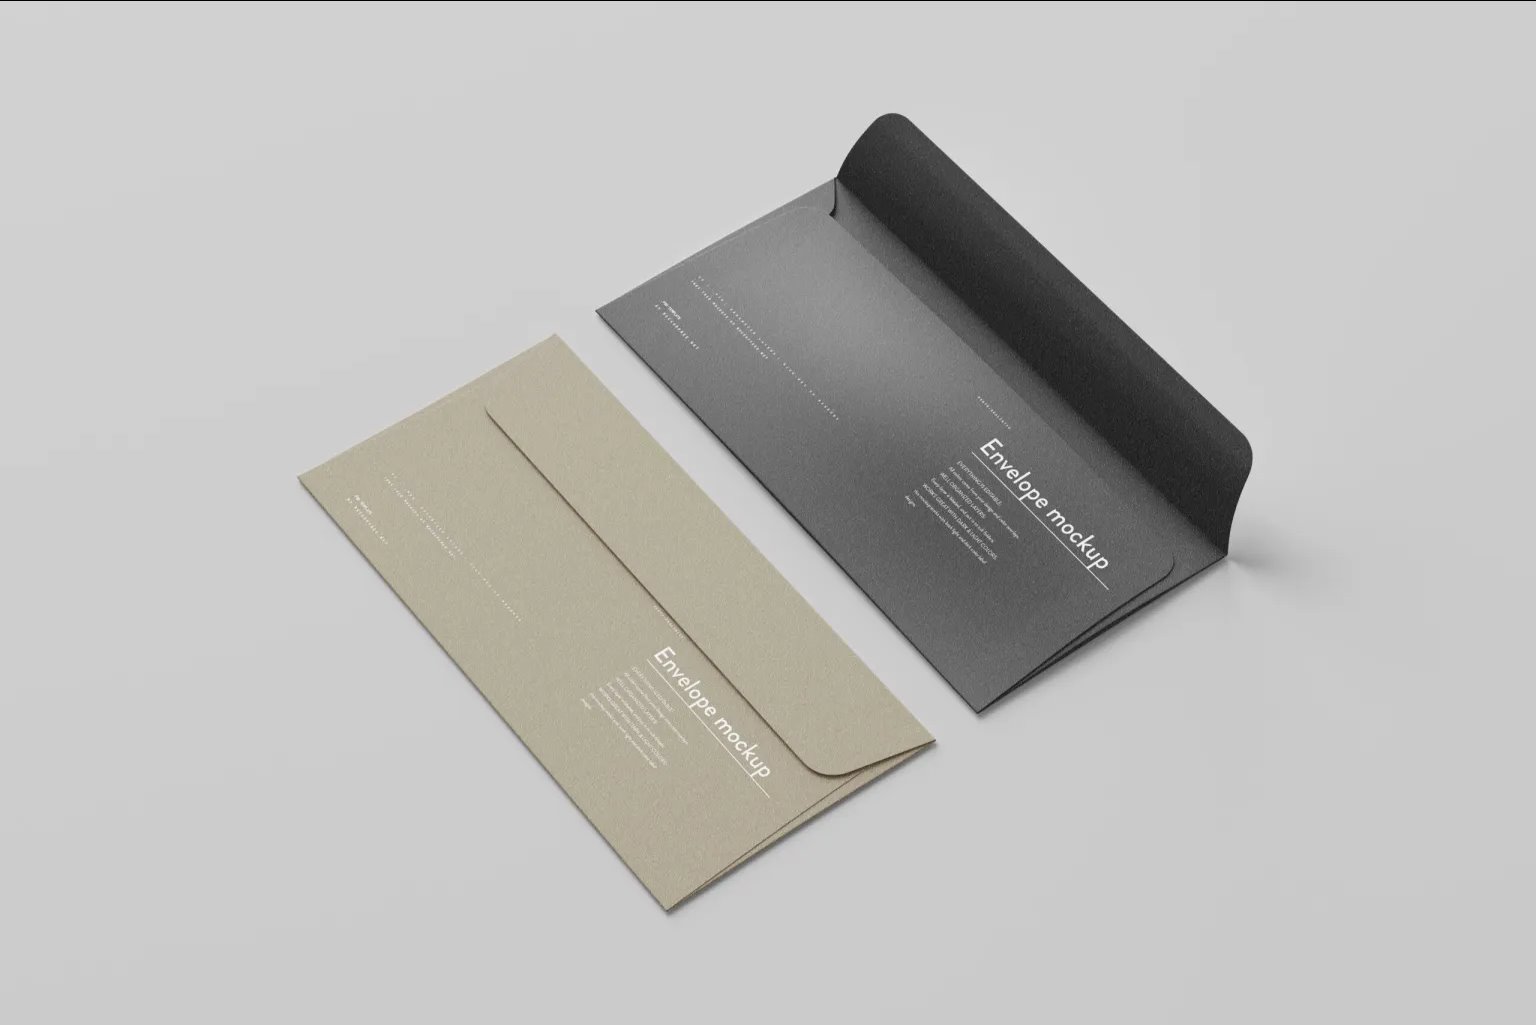 5 Long Corporate Envelopes Mockups in Perspective and Top Visions FREE PSD